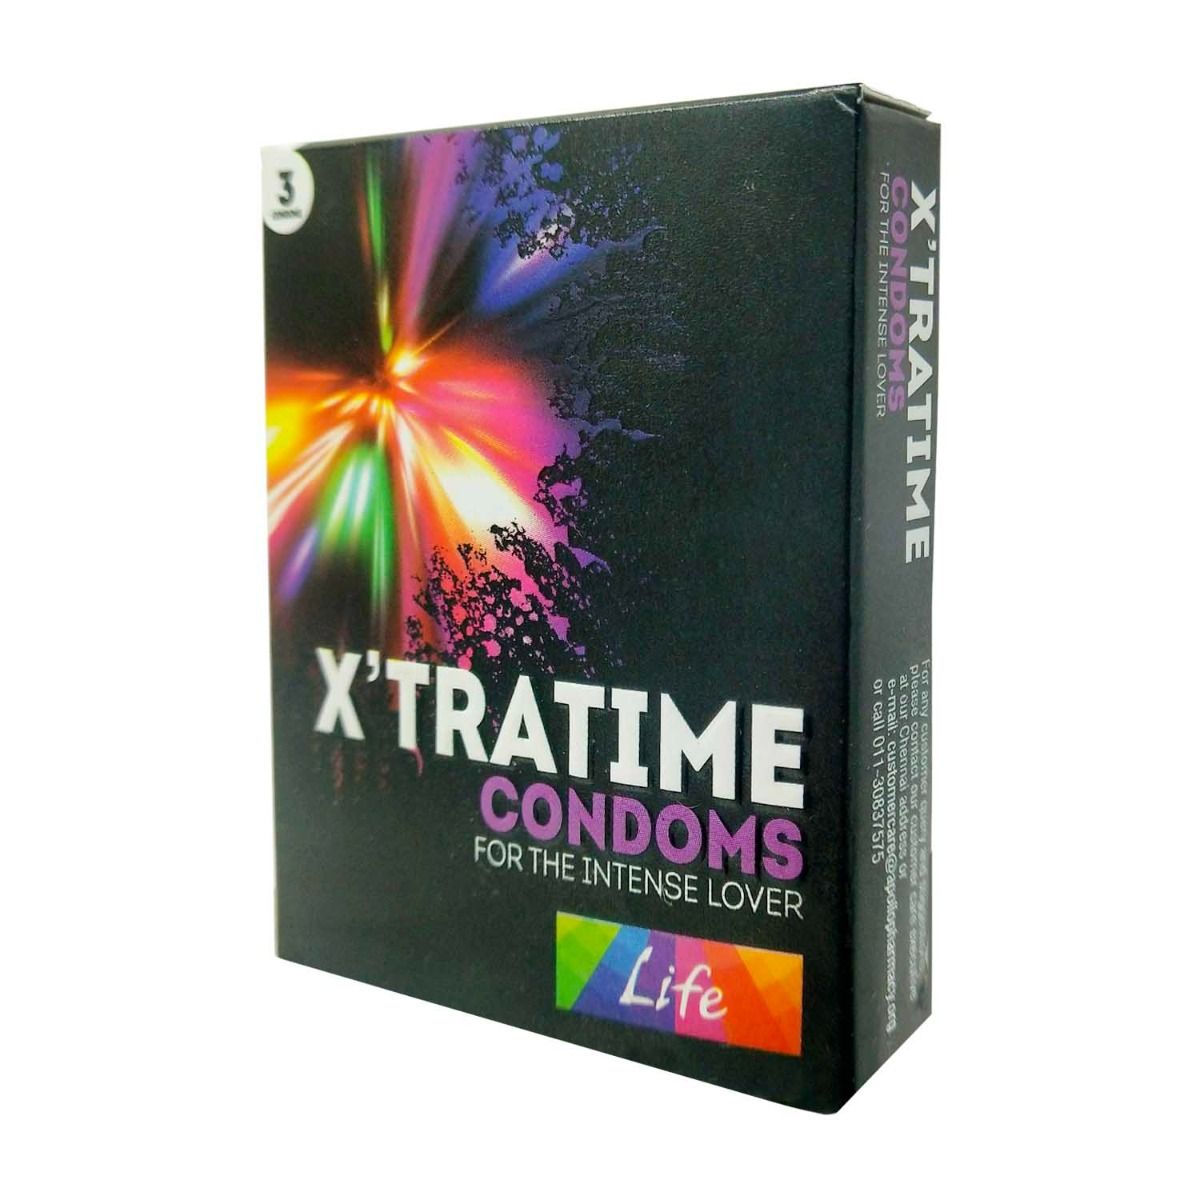 Apollo Life X'tra Time Condoms, 3 Count, Pack of 1 